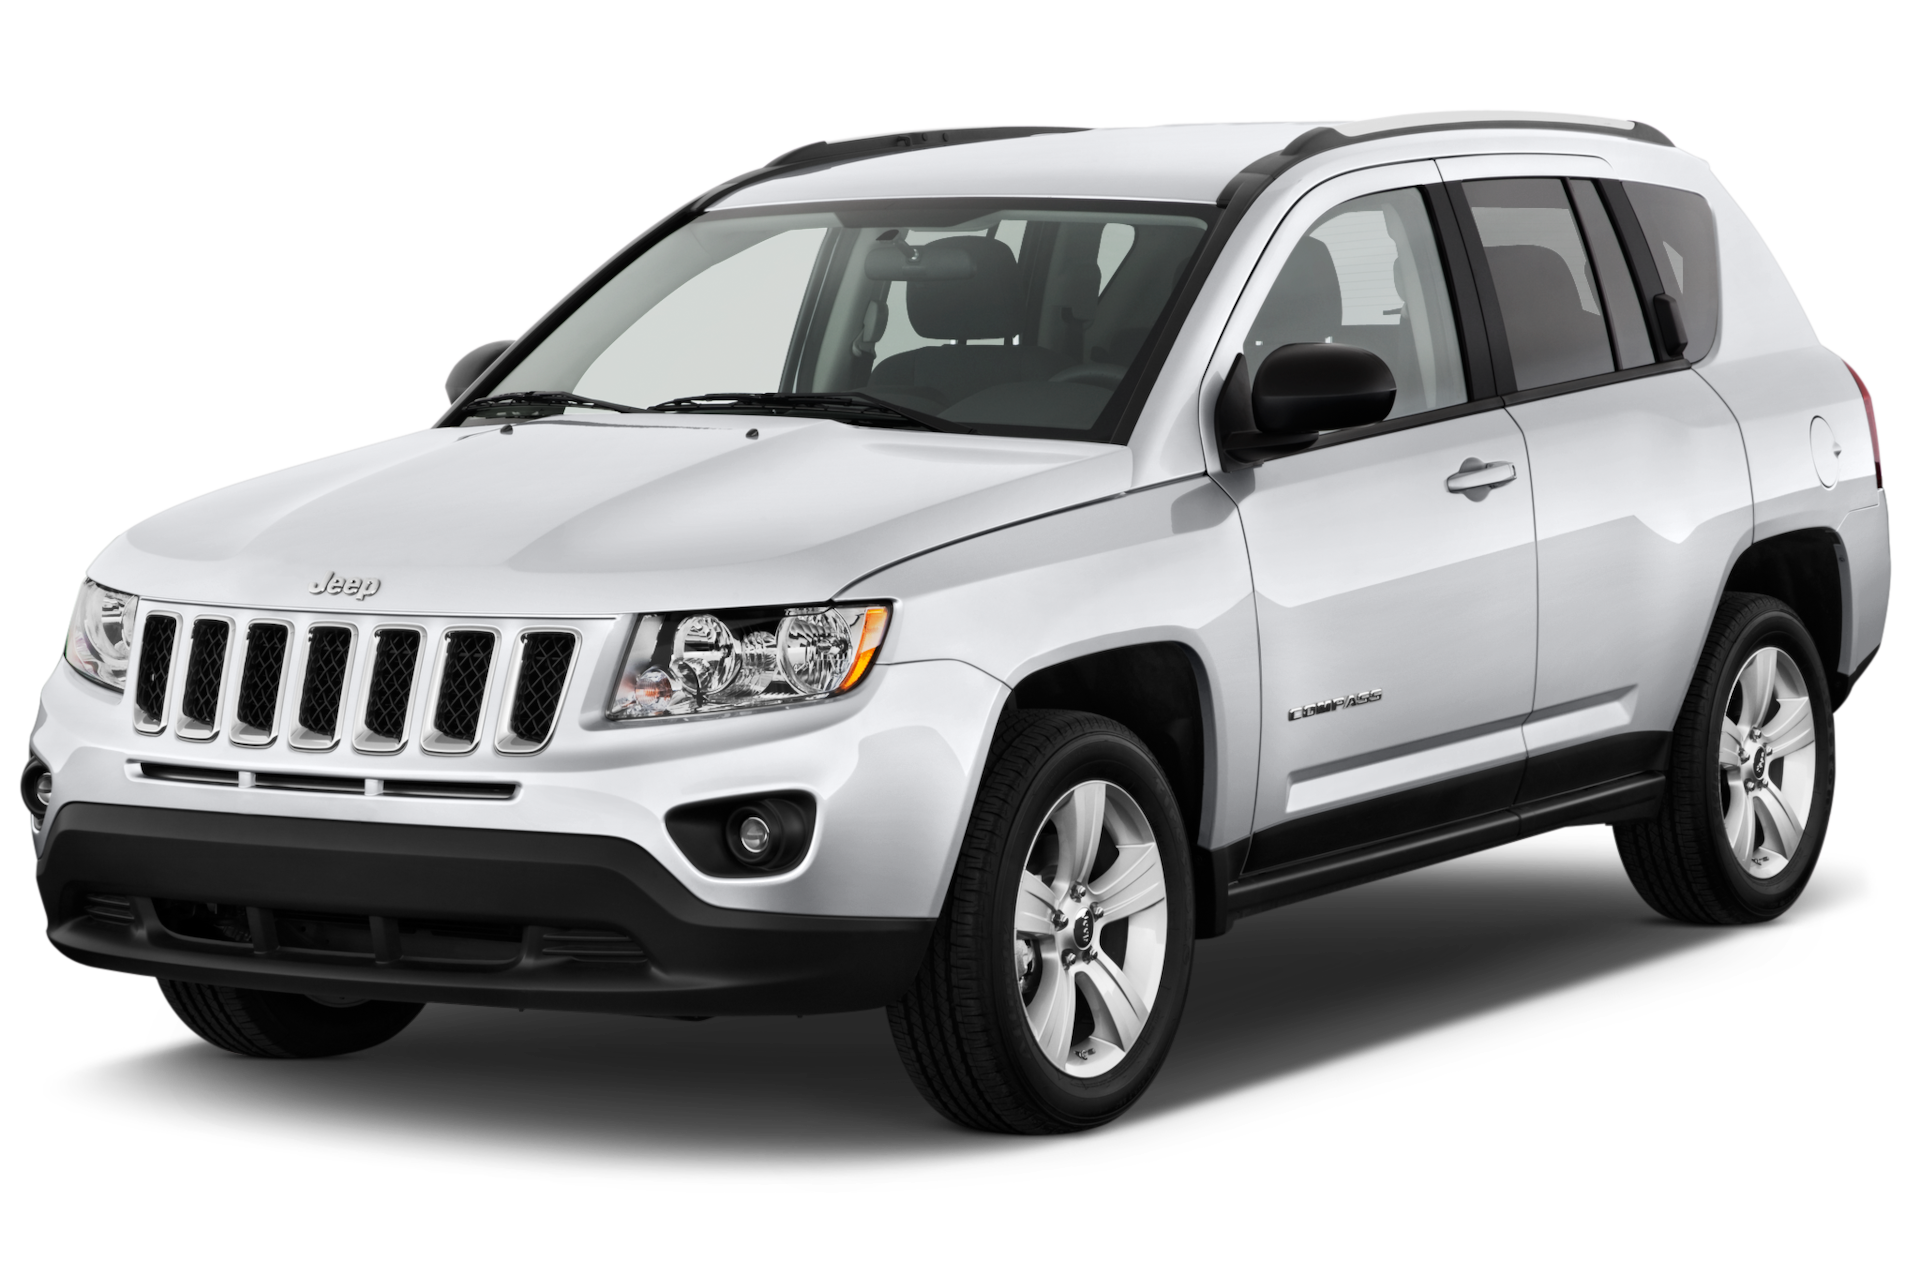 2014 Jeep Compass Prices, Reviews, and Photos - MotorTrend